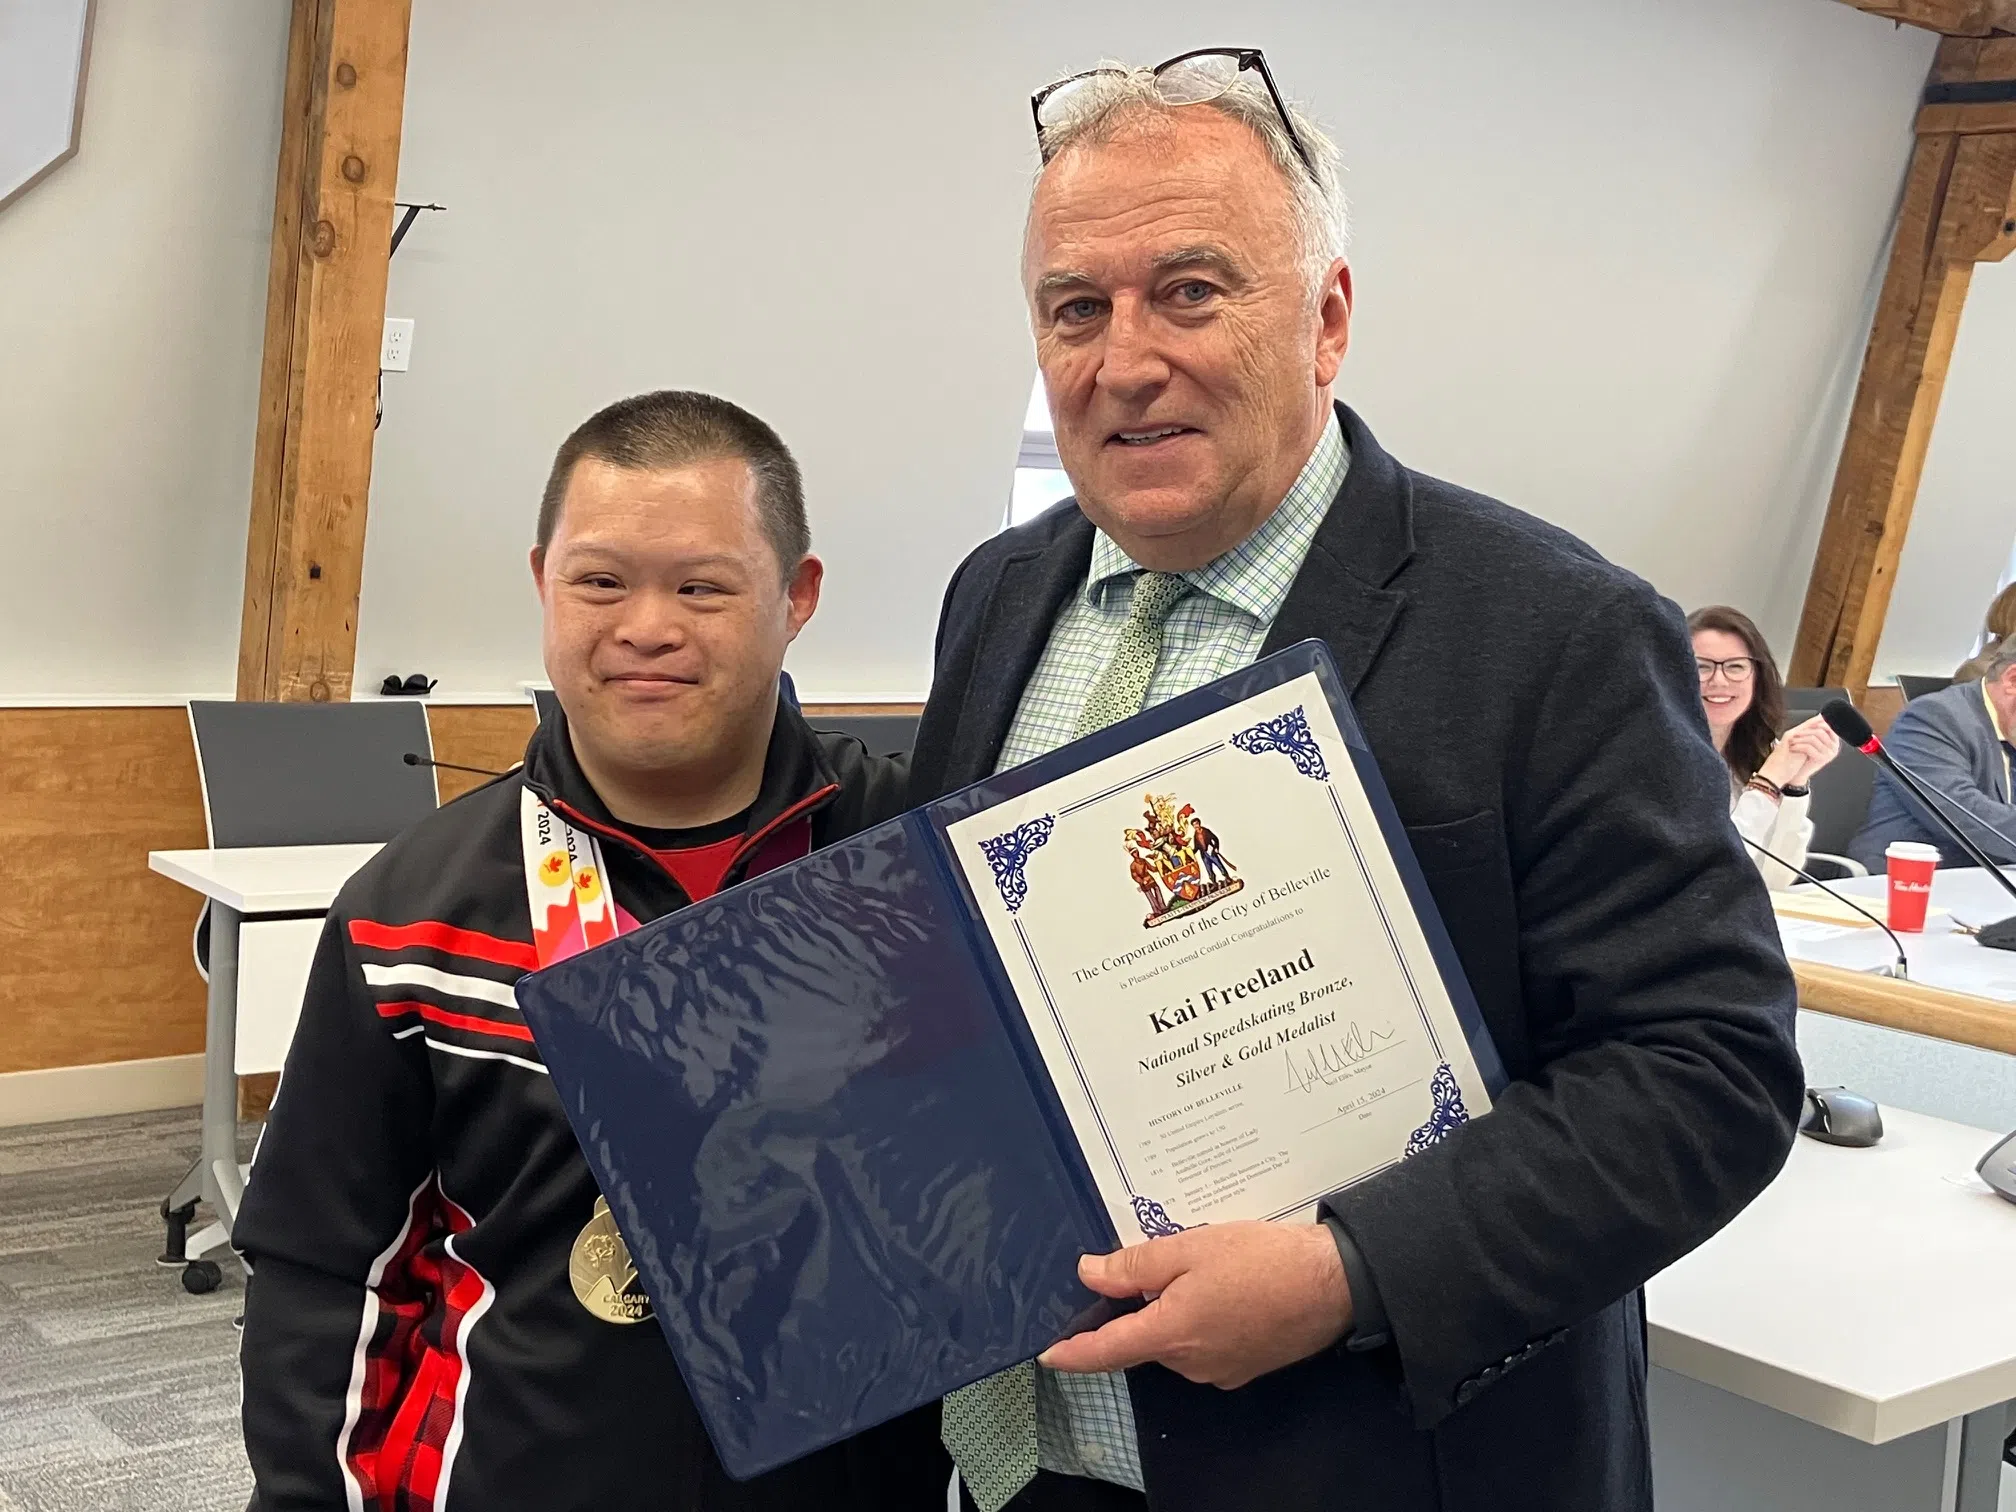 Gold medal winning speed skater recognized by Belleville Council